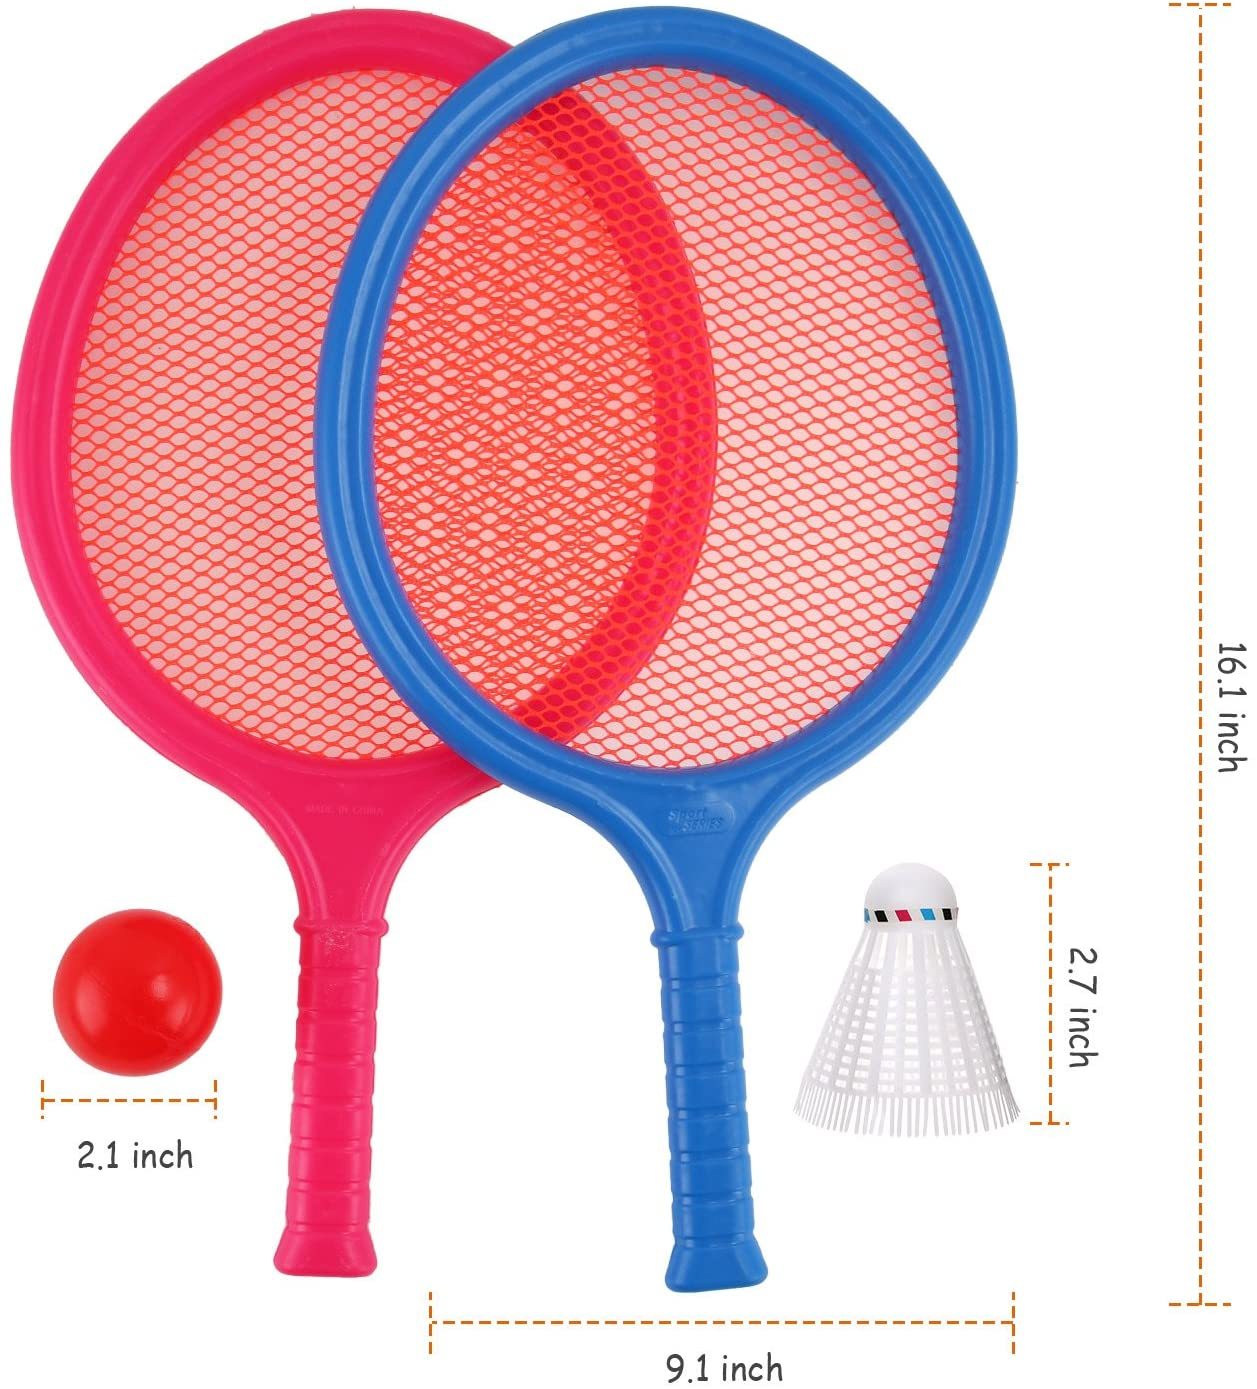 Junior Tennis Racquet Play Game Beach Toys Ball and Birdie Liberty Imports Badminton Set for Kids with 2 Rackets 